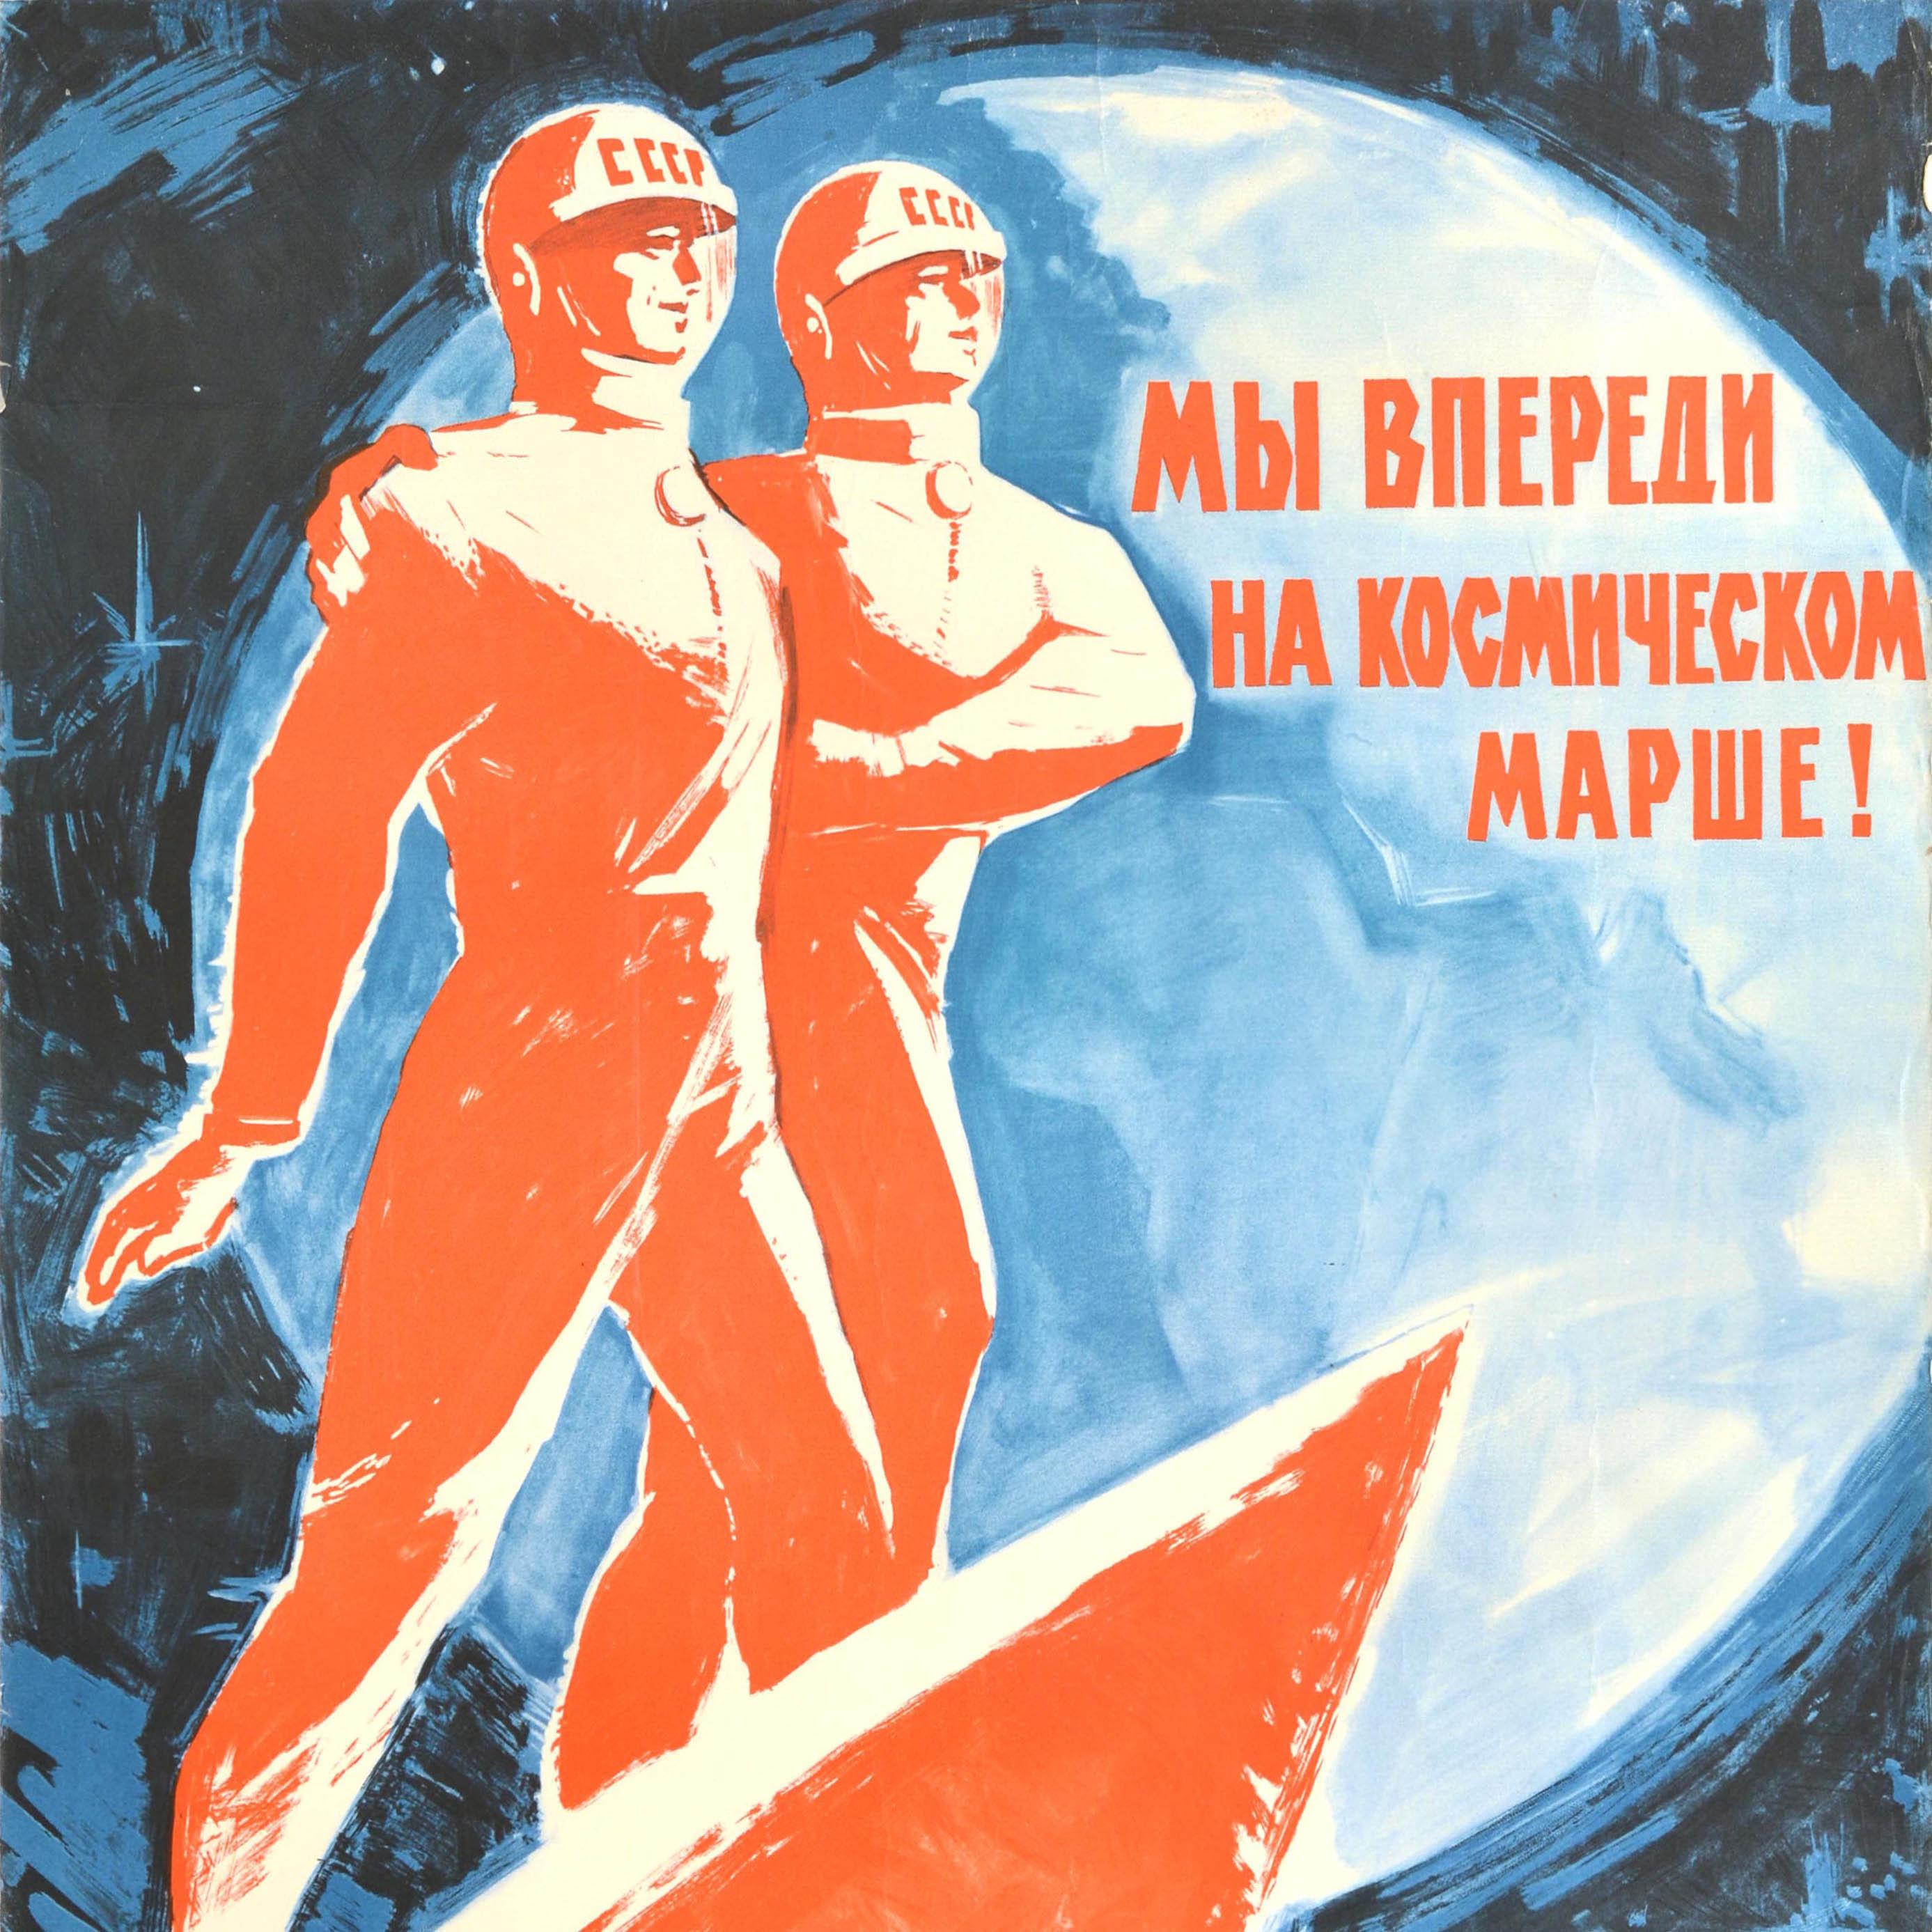 Original vintage Soviet space race propaganda poster - We Are Ahead On The Space March! - featuring a dynamic image of two cosmonauts with CCCP / USSR on their helmets standing on a Voskhod 2 rocket with a planet on a starry sky background, the